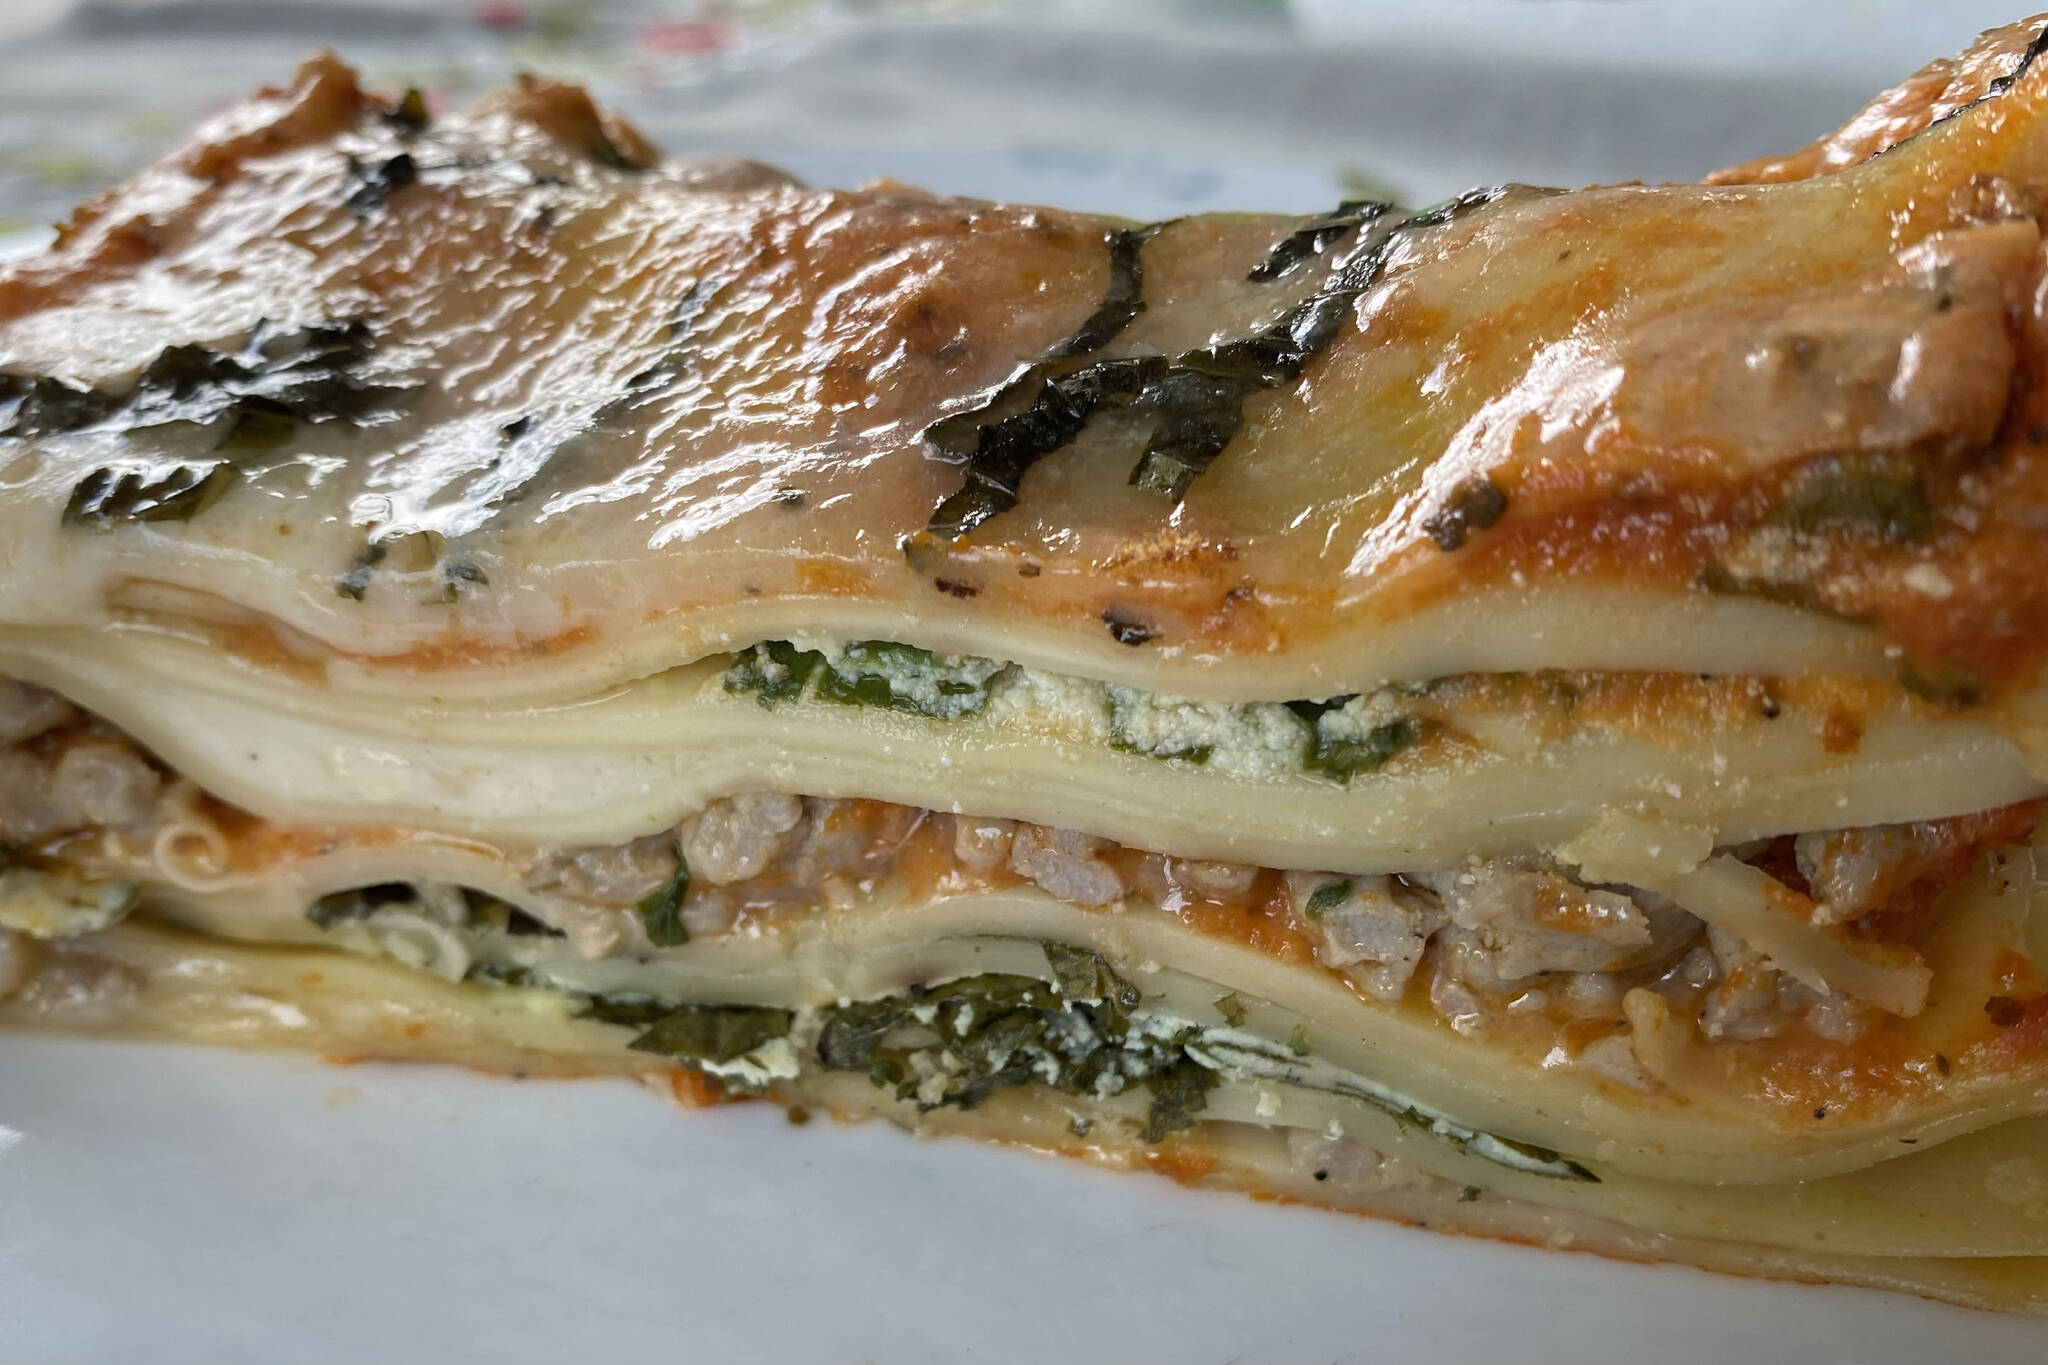 This meat lasagna includes layers of sausage, ricotta, bechamel and spinach. (Photo by Tressa Dale/Peninsula Clarion)